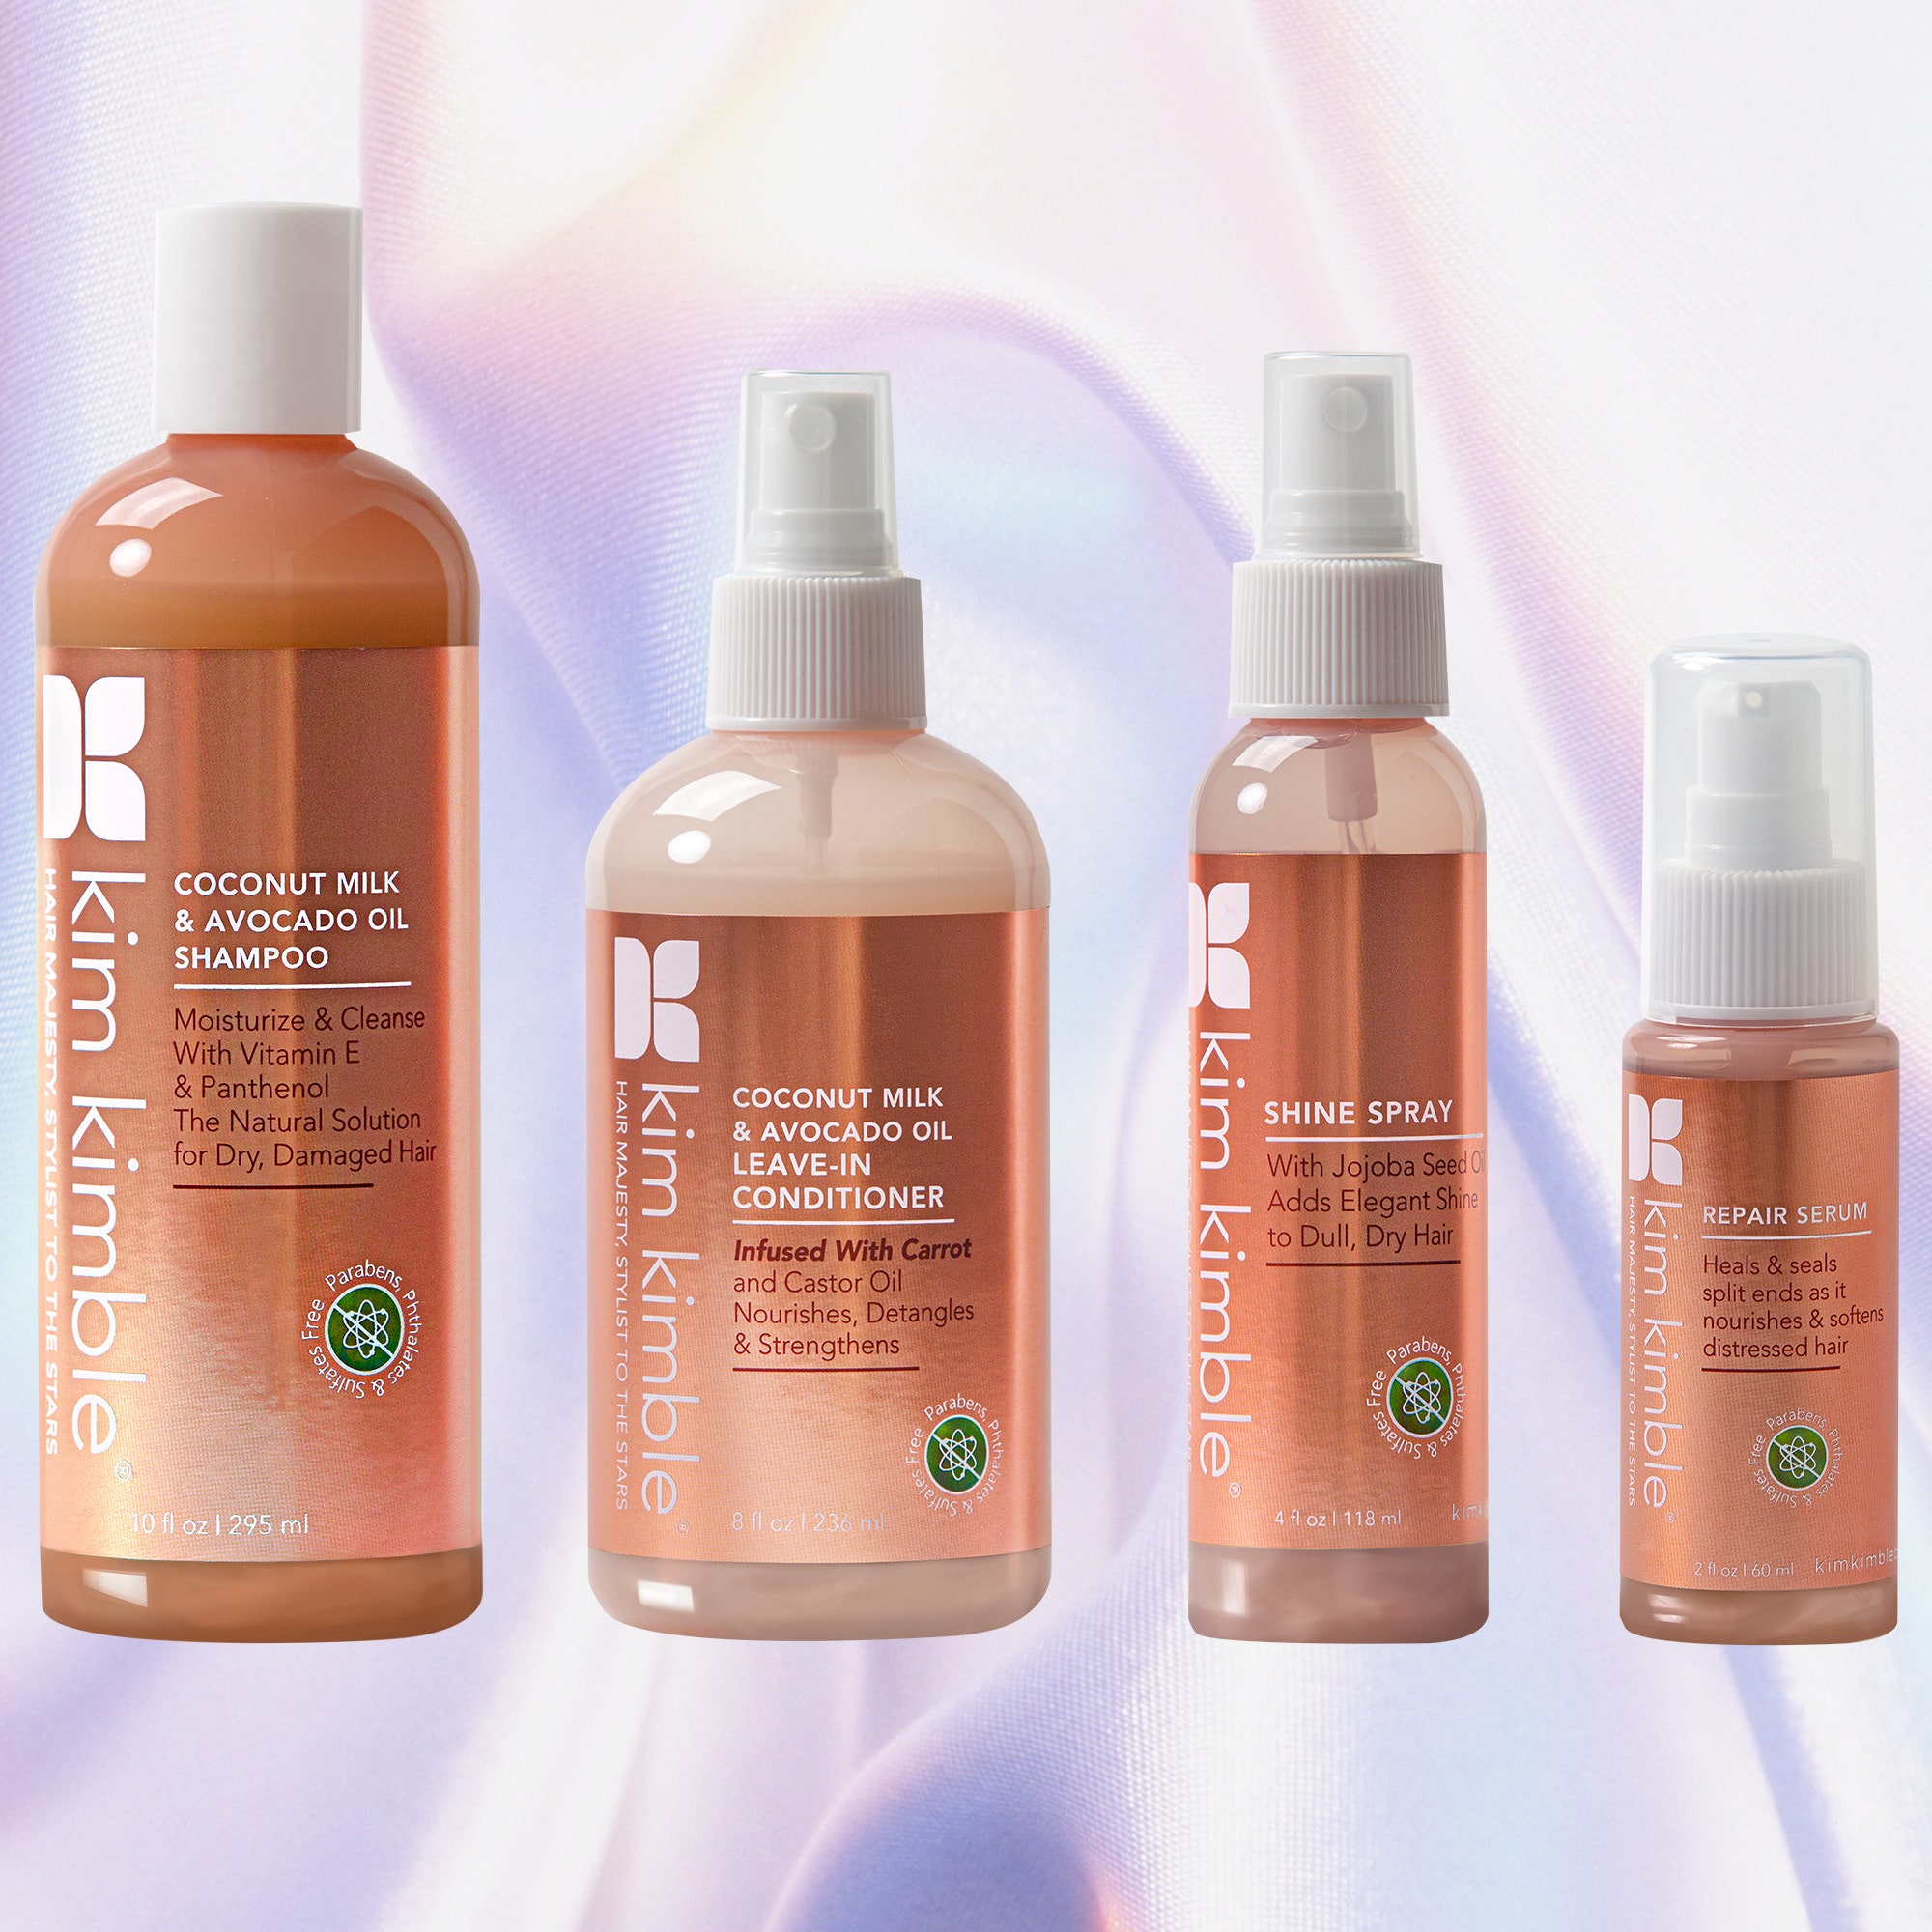 Hairstylist Kim Kimble Launches New Hair-Care Line at Sally Beauty